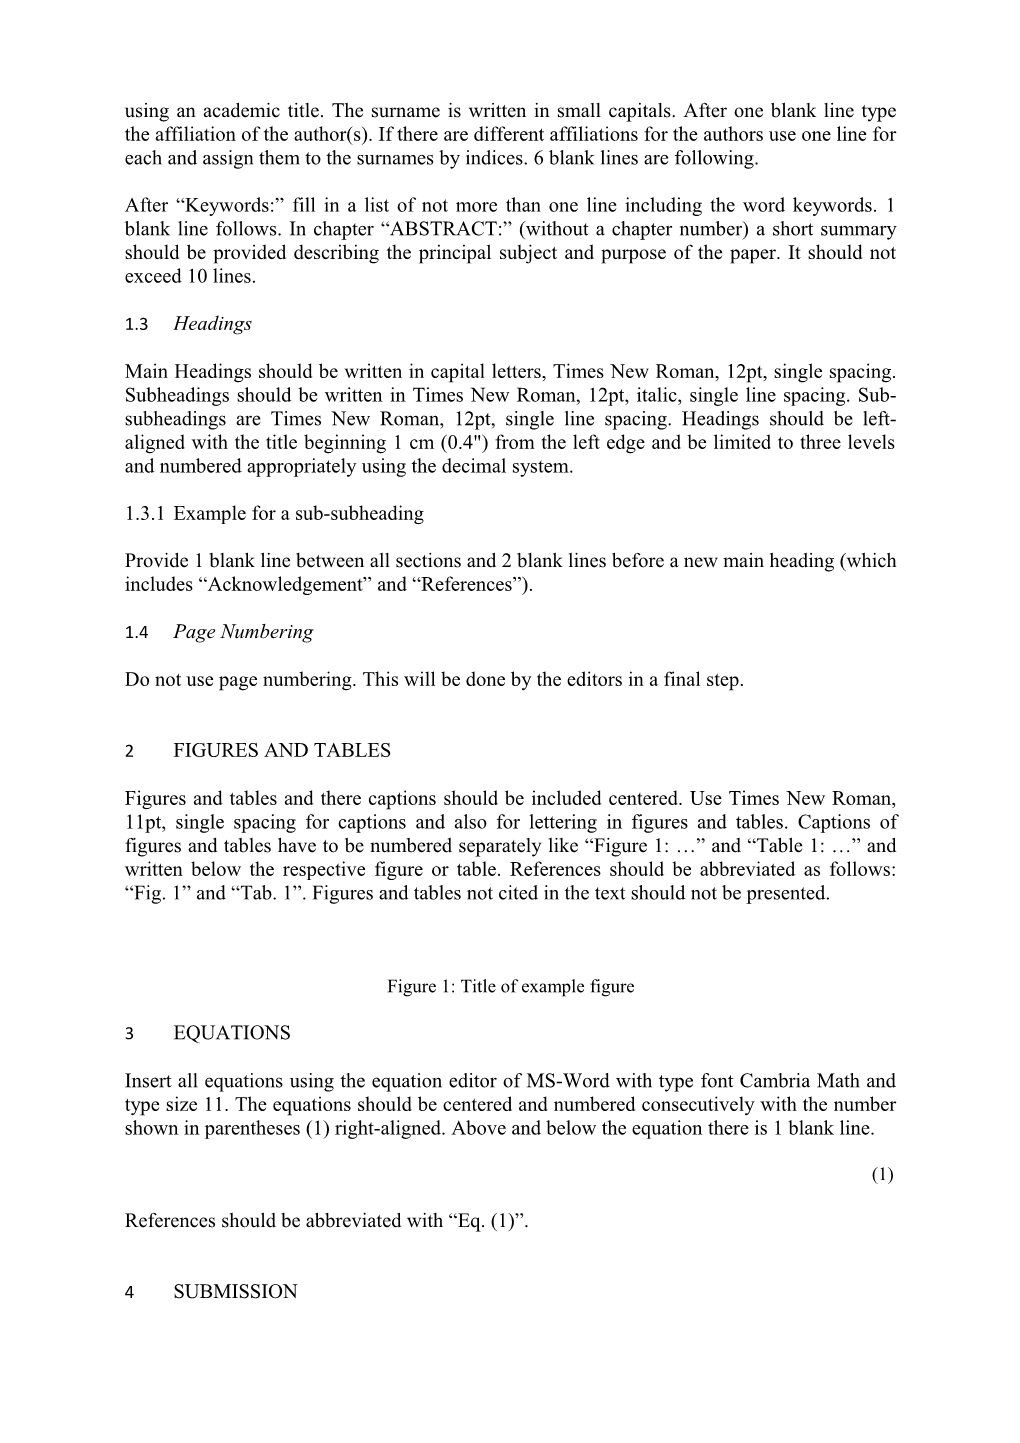 Instructions for the Preparation of the Full Paper ISCT 2012 (Times New Roman, 18Pt)